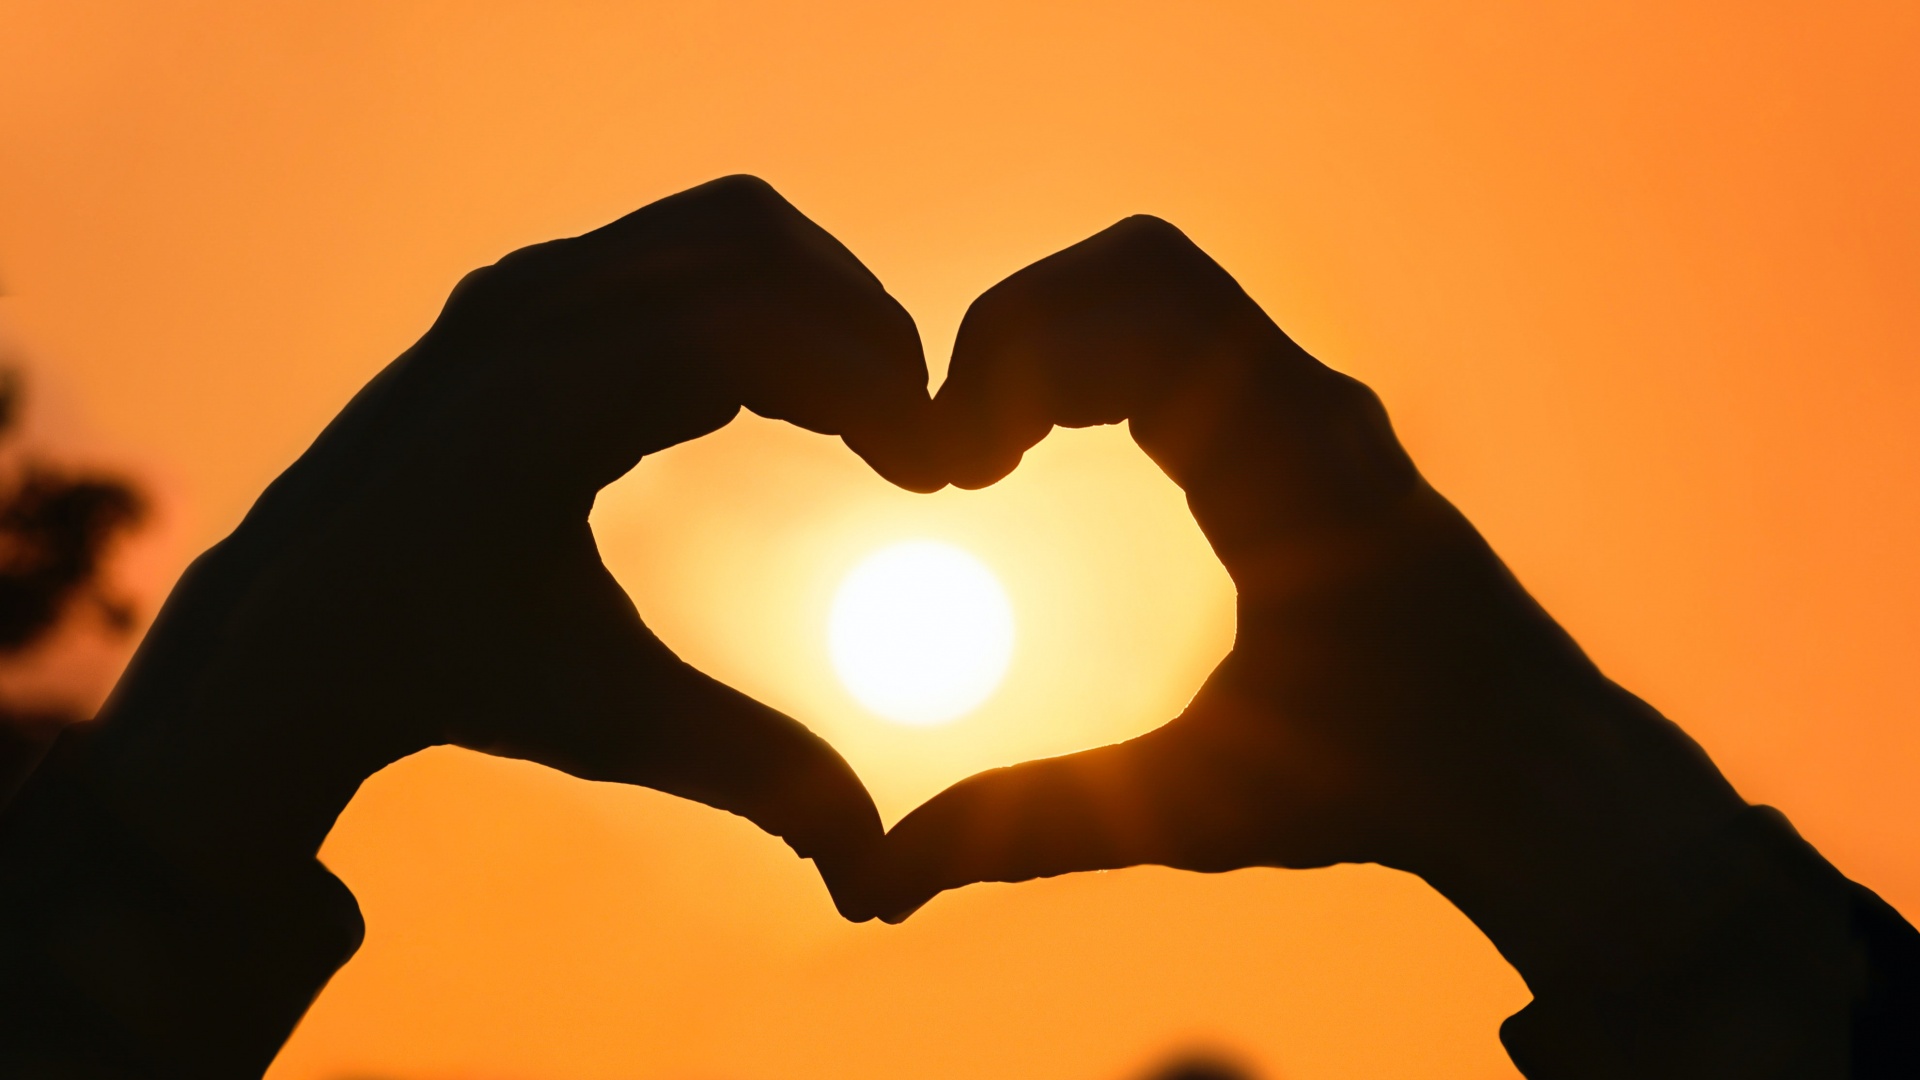 Heart Hands Together Sunset Silhouette Wallpaper